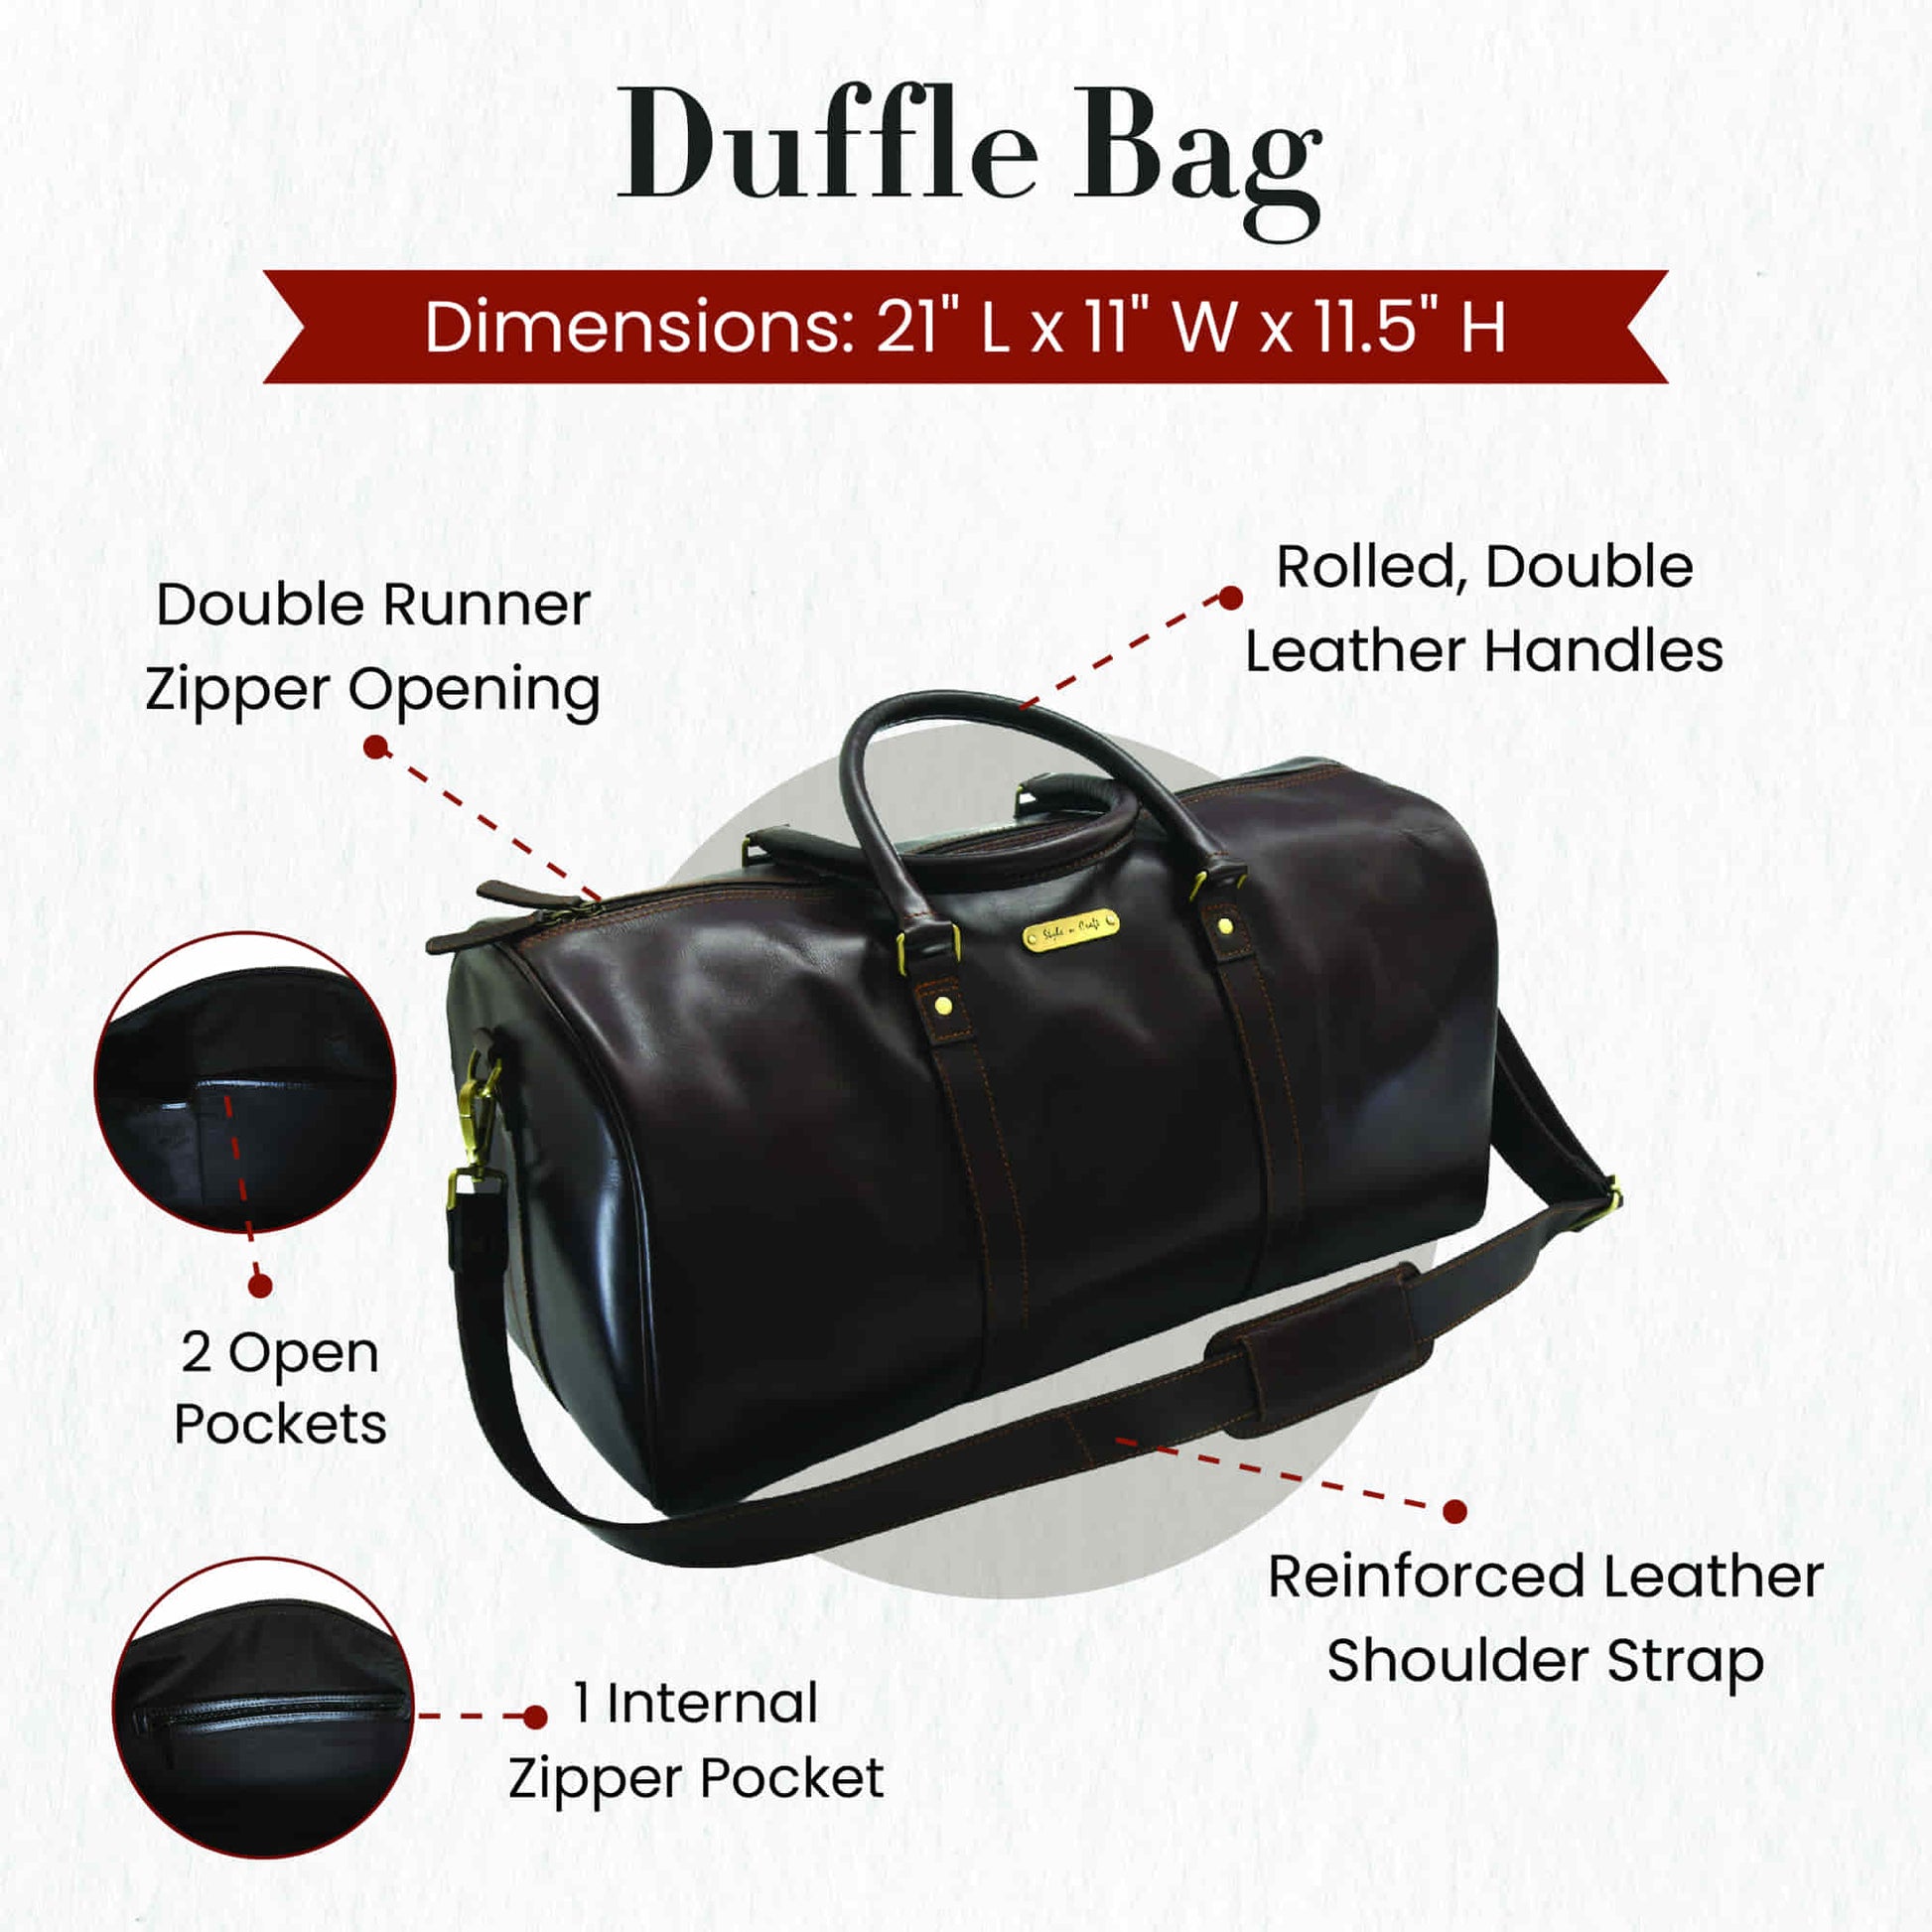 Style n Craft 392101 Duffle Bag in Full Grain Dark Brown Leather - Front Angled View Showing Details